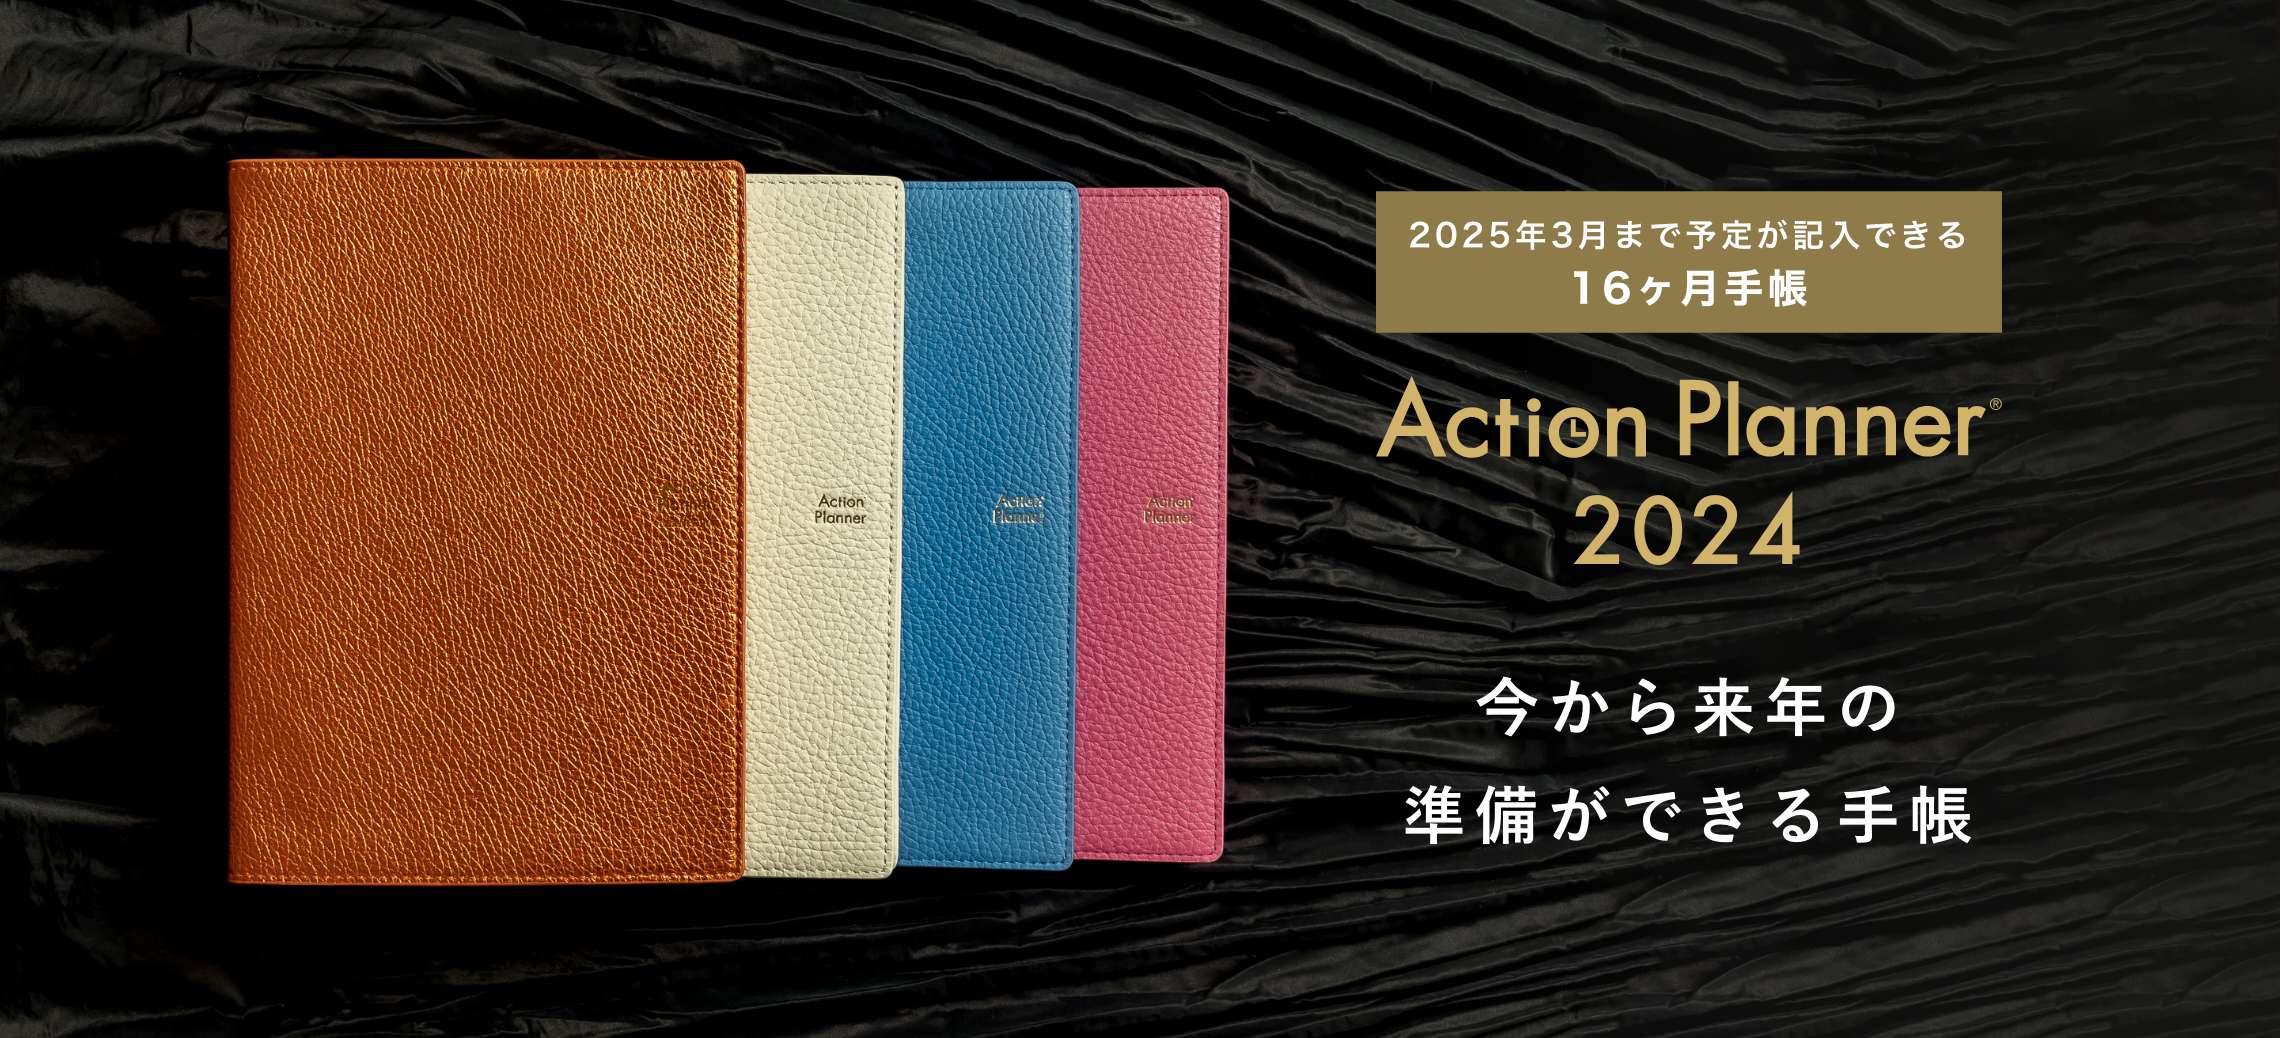 Action Planner 2024